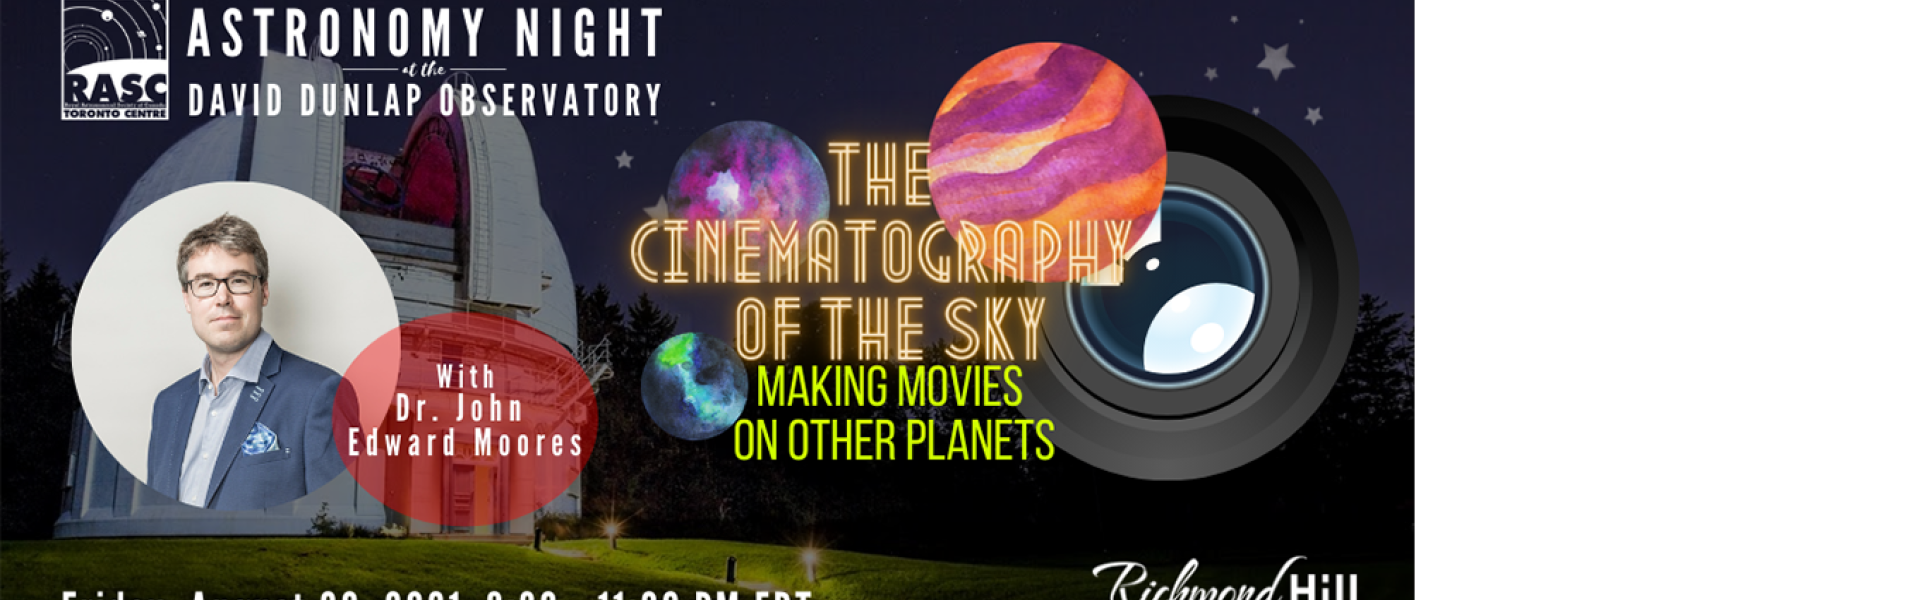 Astronomy Speakers Night - The Cinematography of the Skies